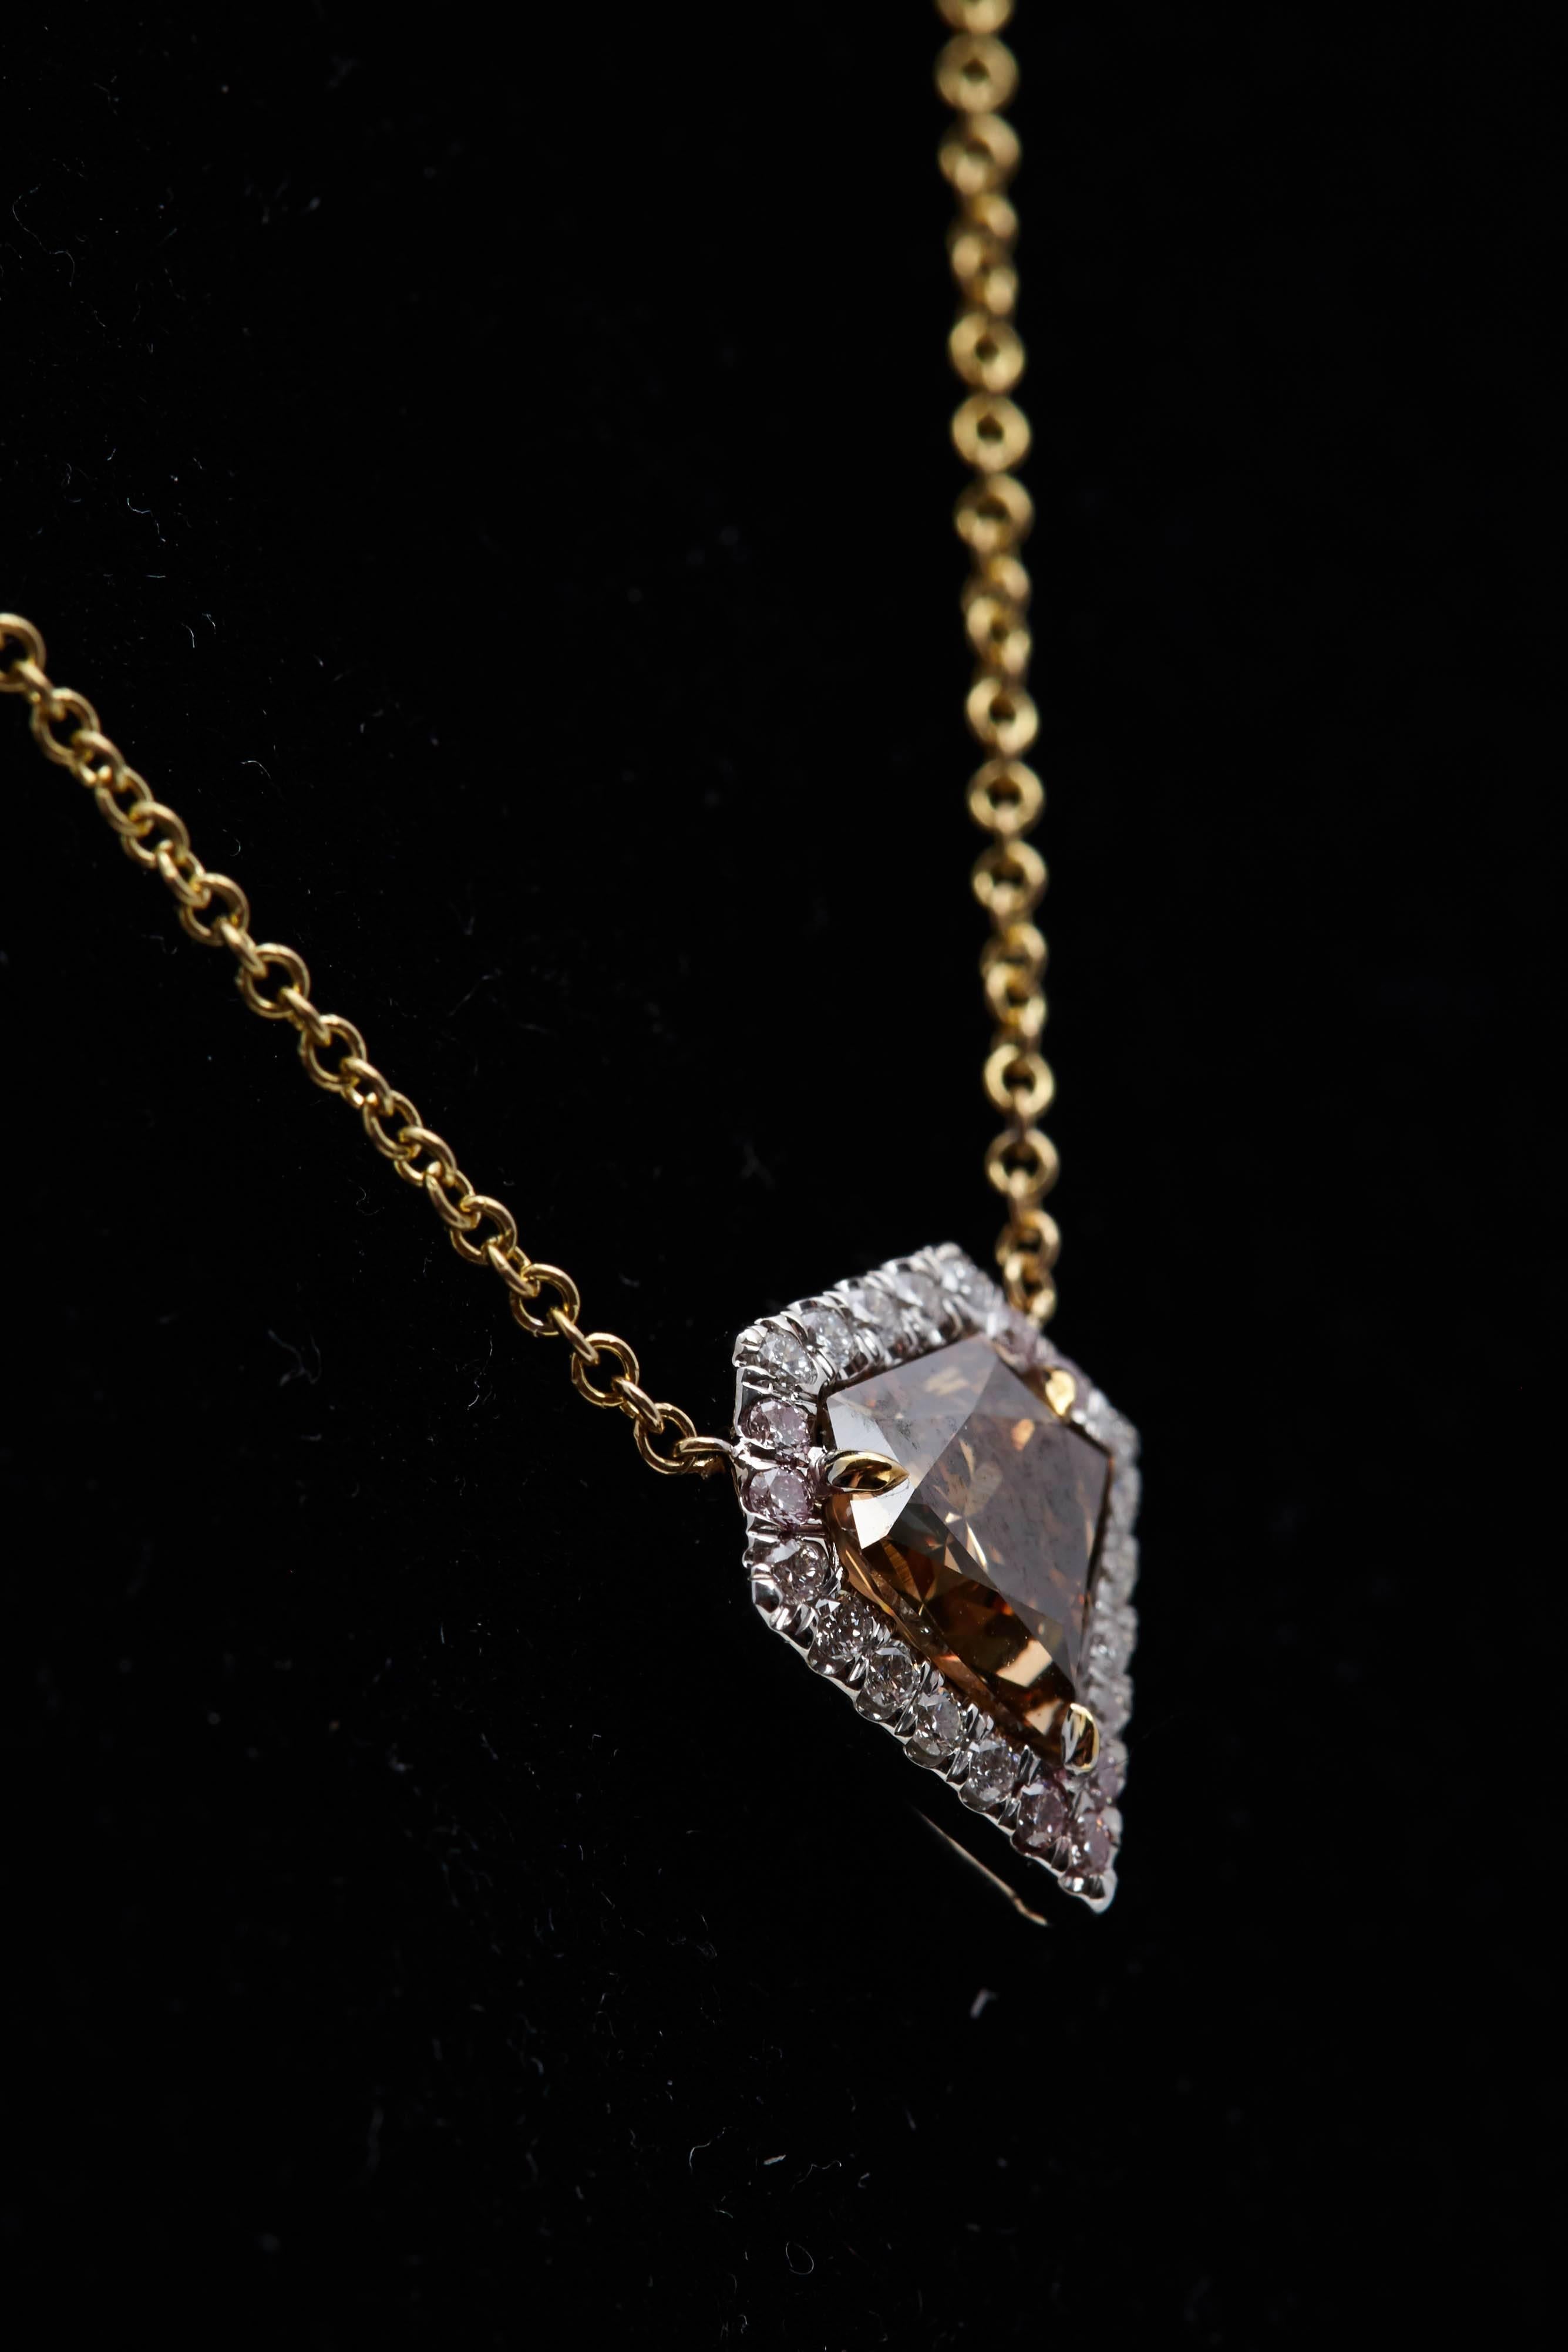 Shield shaped diamond weighing 1.45 carats surrounded by 22 round diamonds weighing .27 carat. The shield shaped diamond has a certificate from the Gemological Institute of America stating that it is Natural Fancy Orange-Brown in color and VS2 in